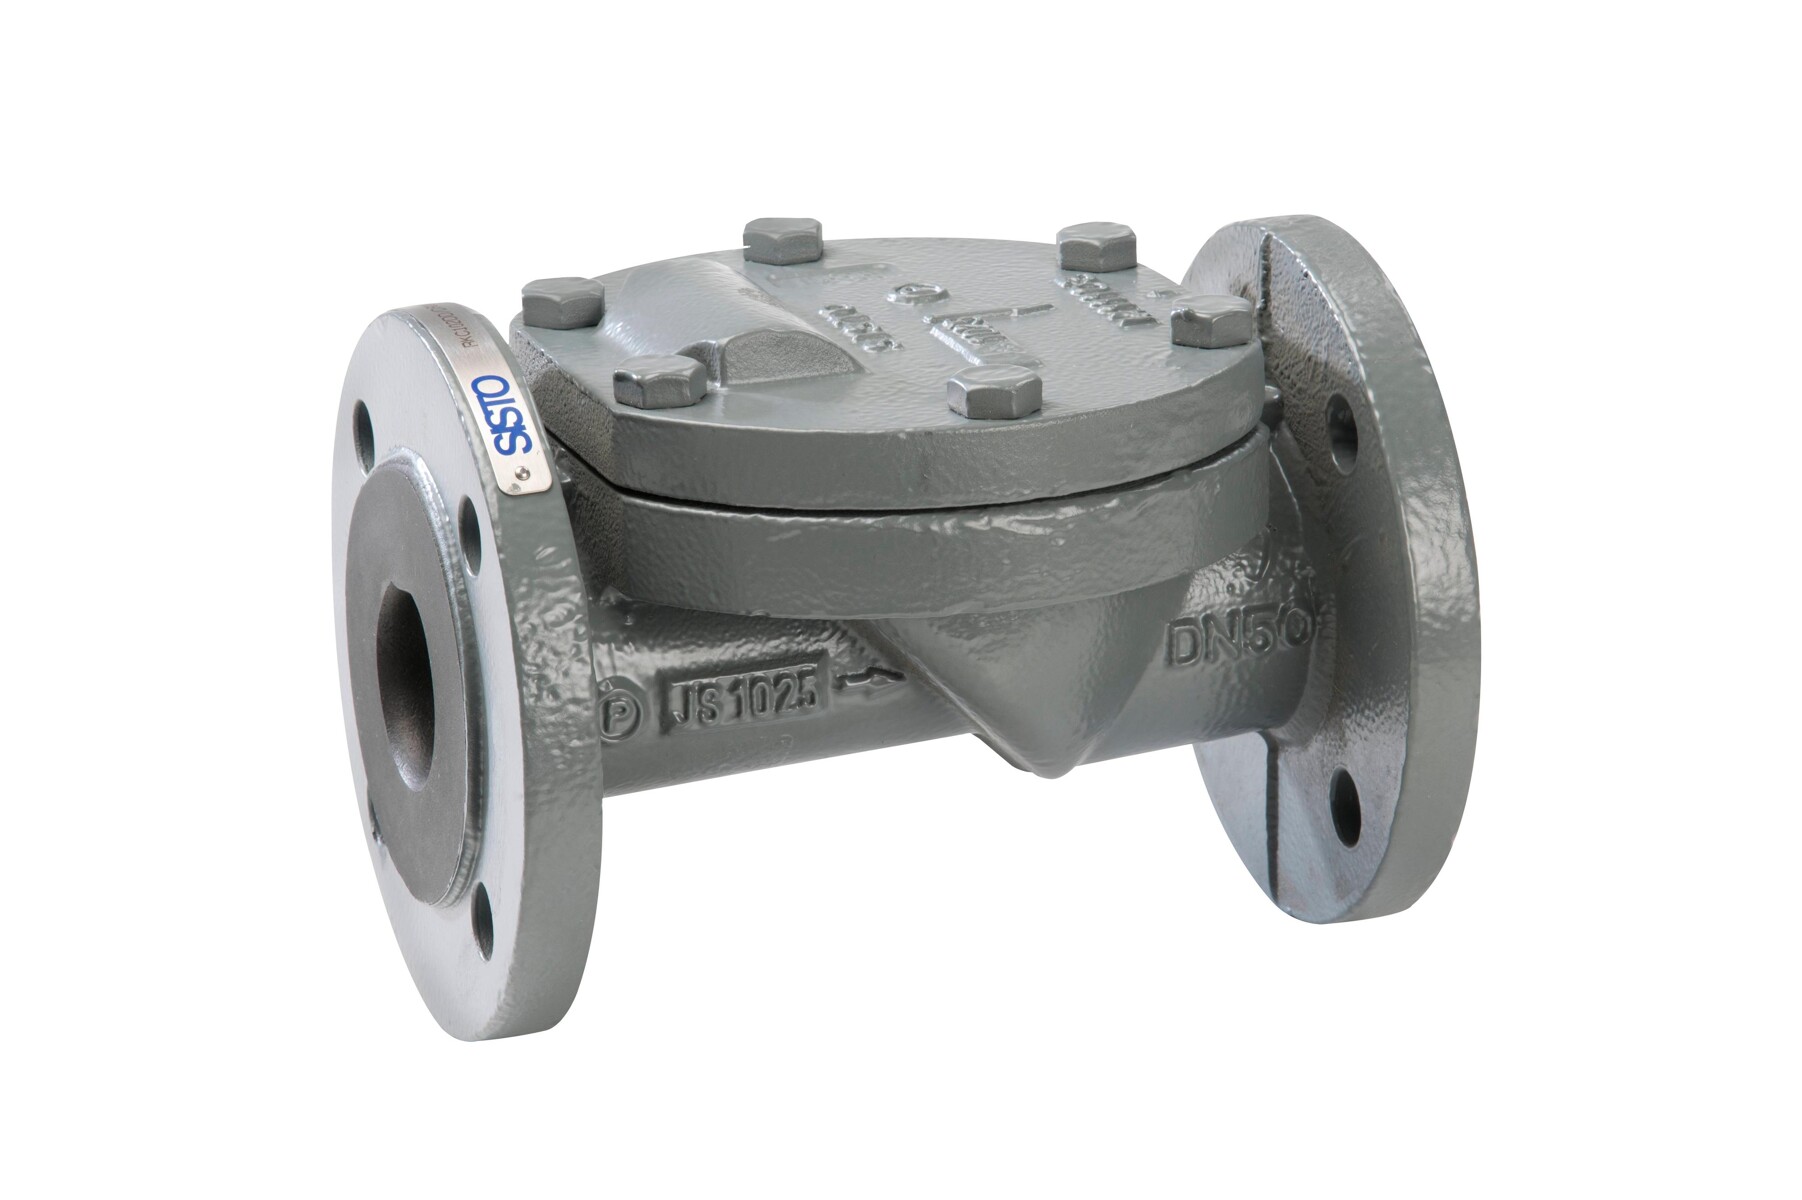 Swing check valves of the type SISTO-RSK 